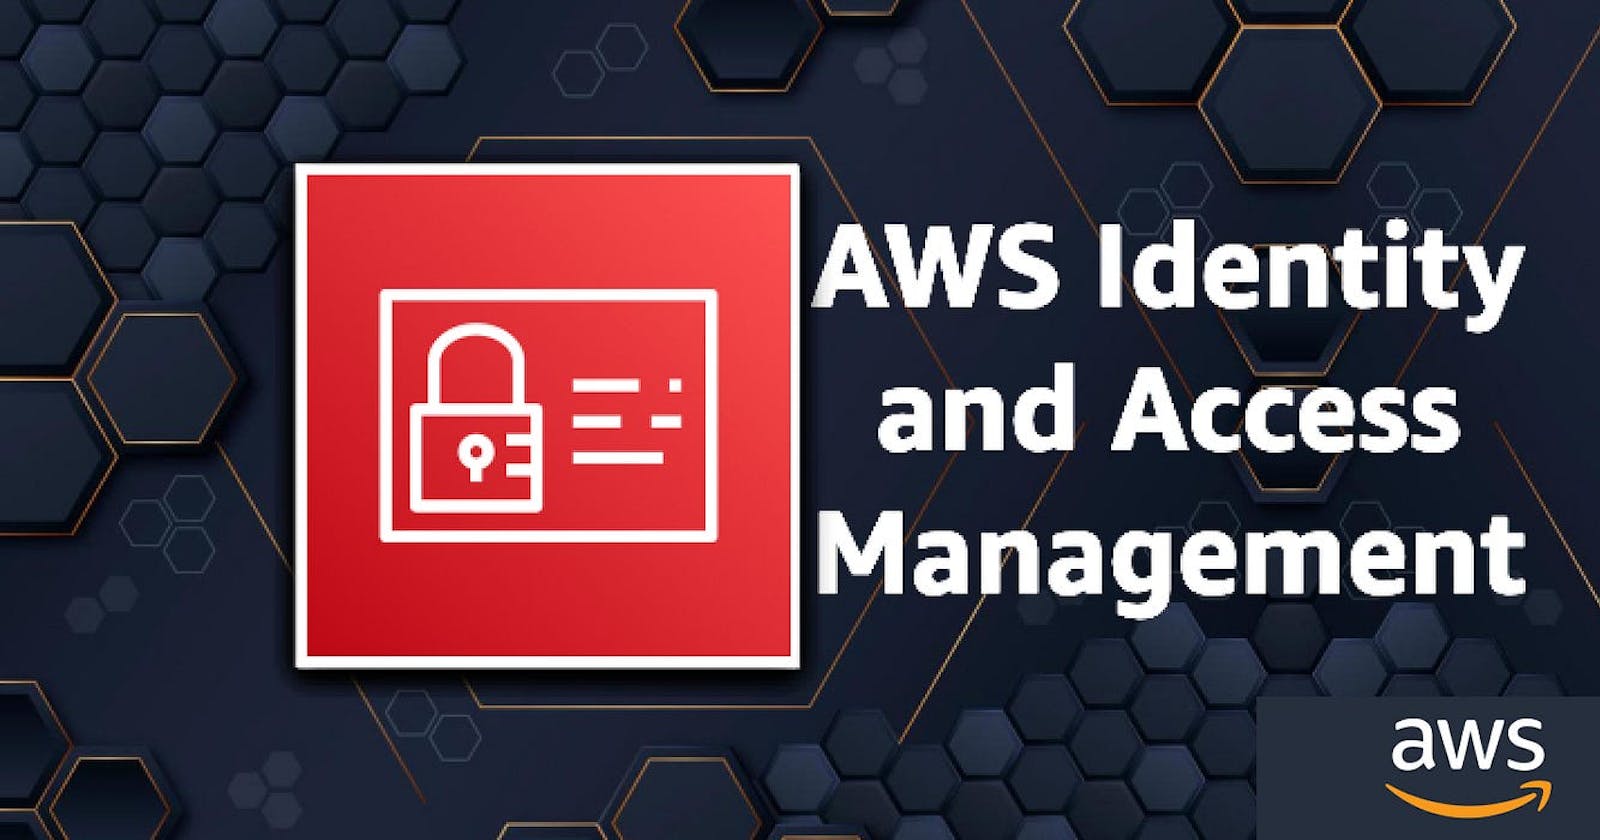 Day 39 - Exploring AWS and IAM Essentials in the Cloud! ☁️🛡️